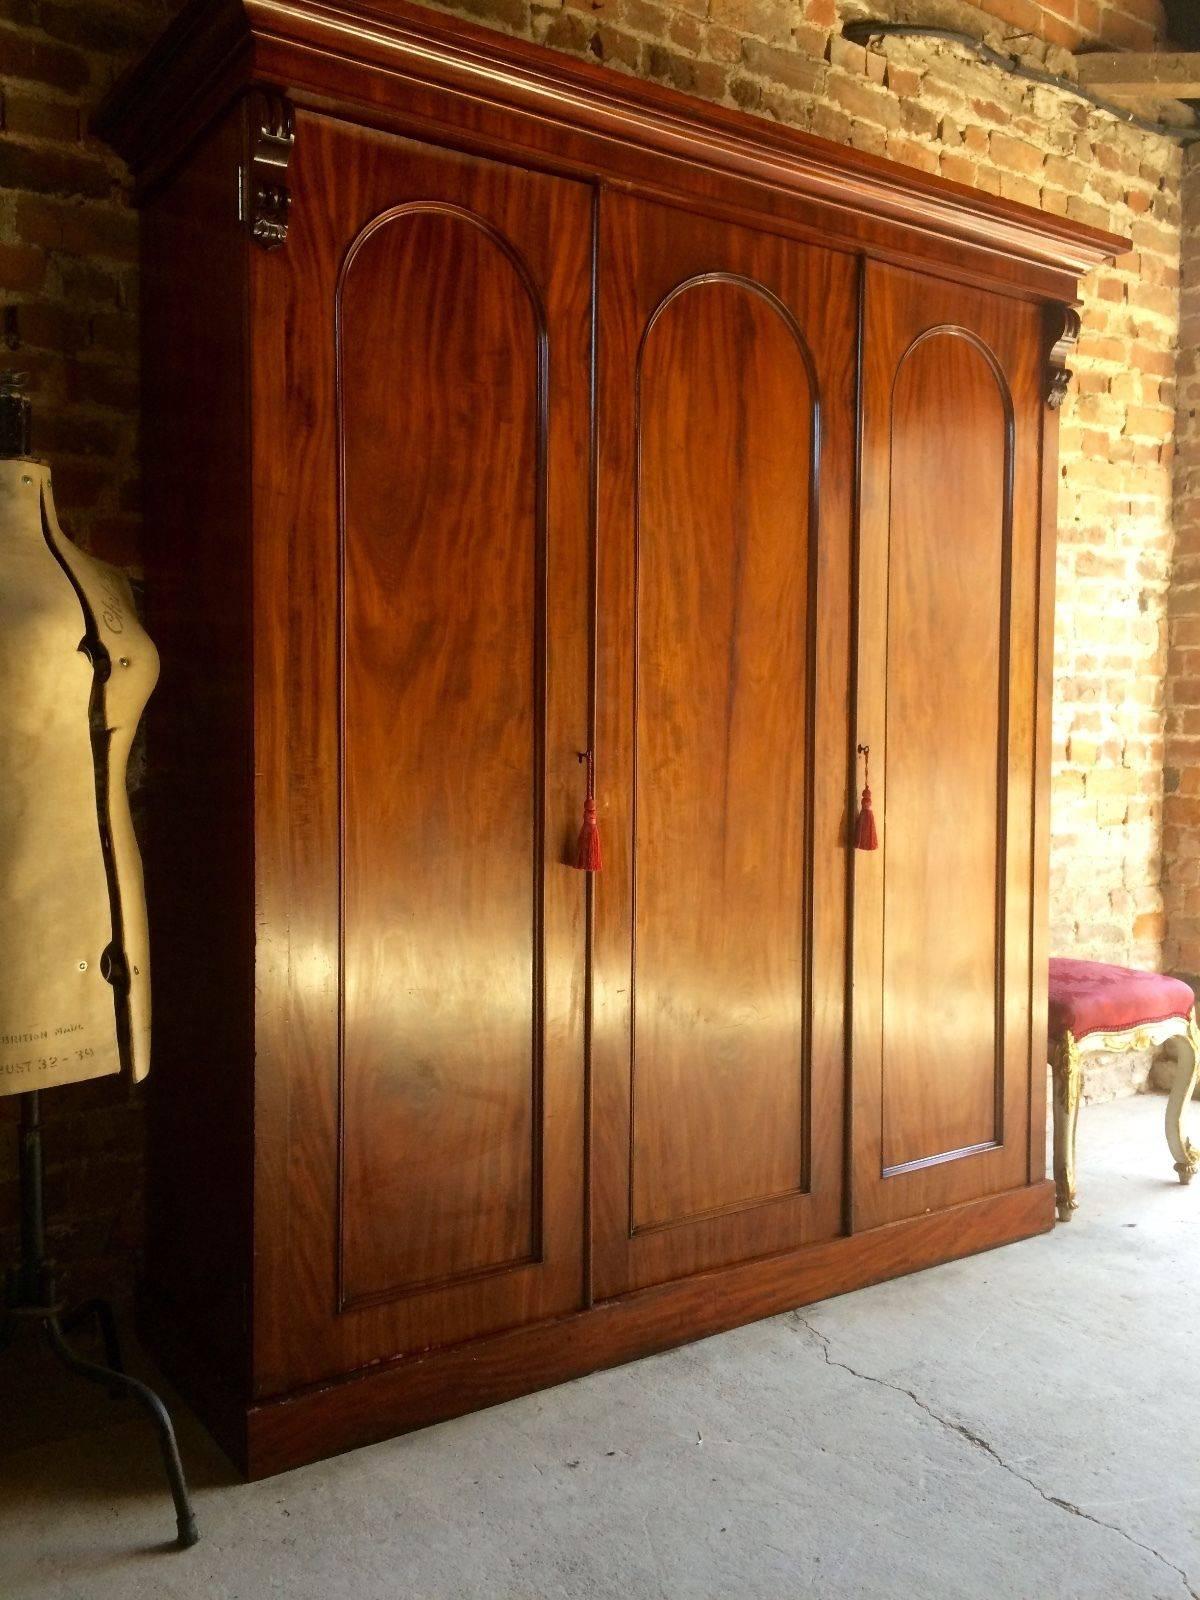 Antique Wardrobe Compactum Armoire Mahogany Victorian, 19th Century Large In Excellent Condition In Longdon, Tewkesbury